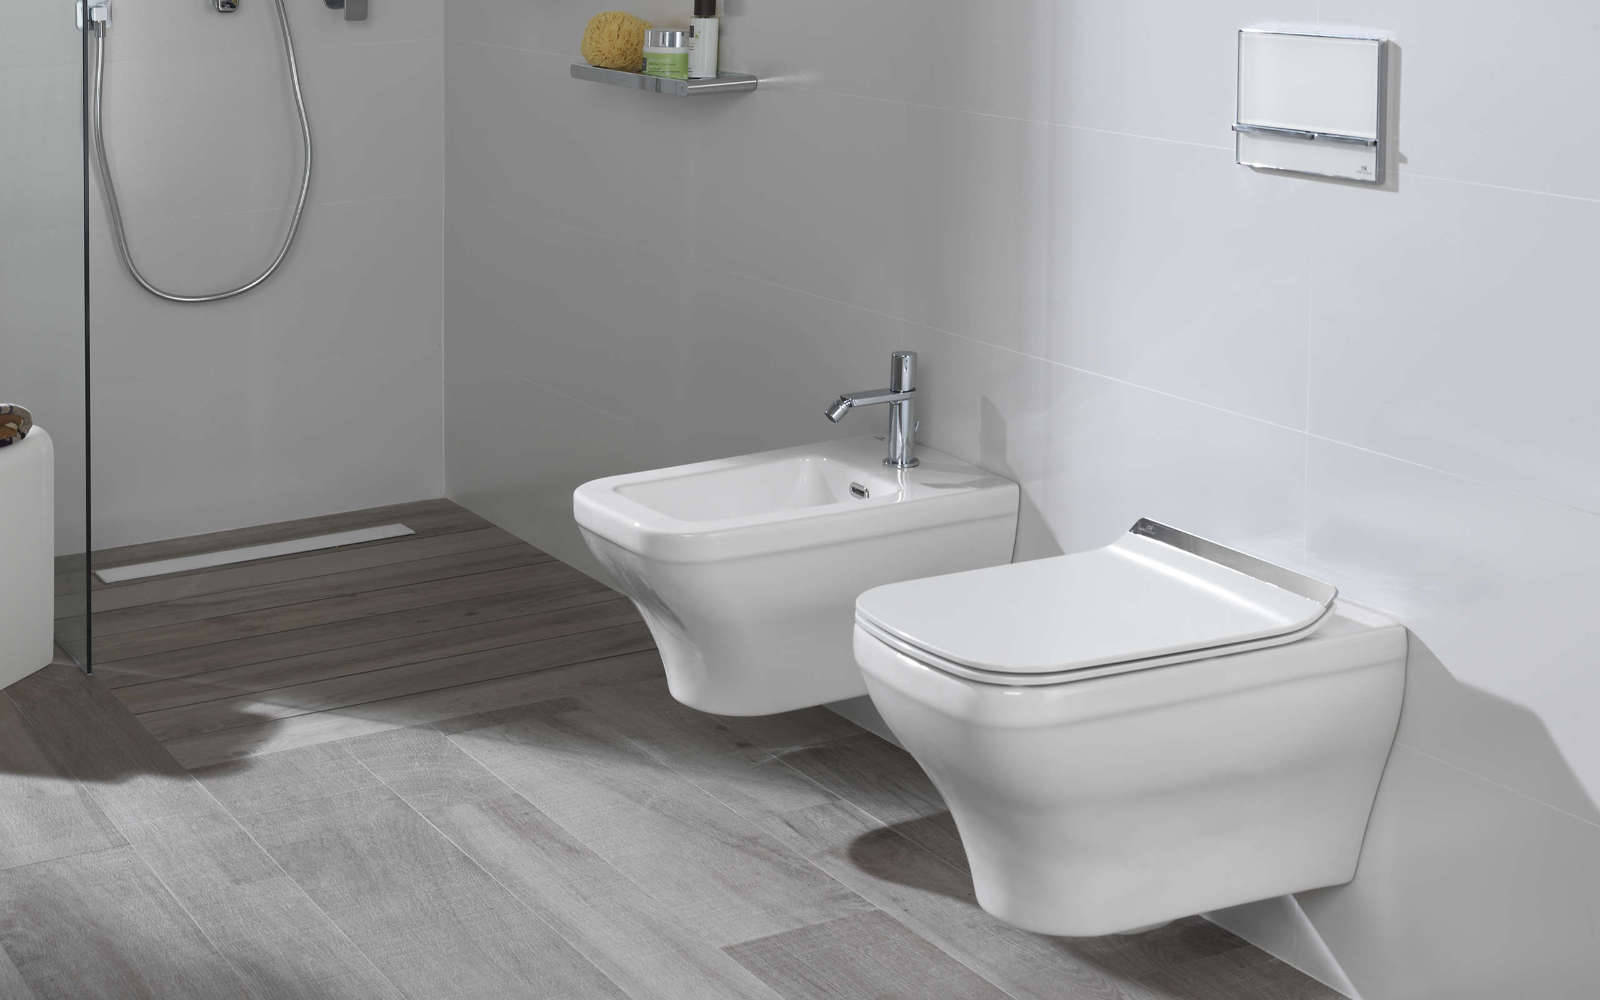 Oxo' by Noken, premium sustainability for the bathroom